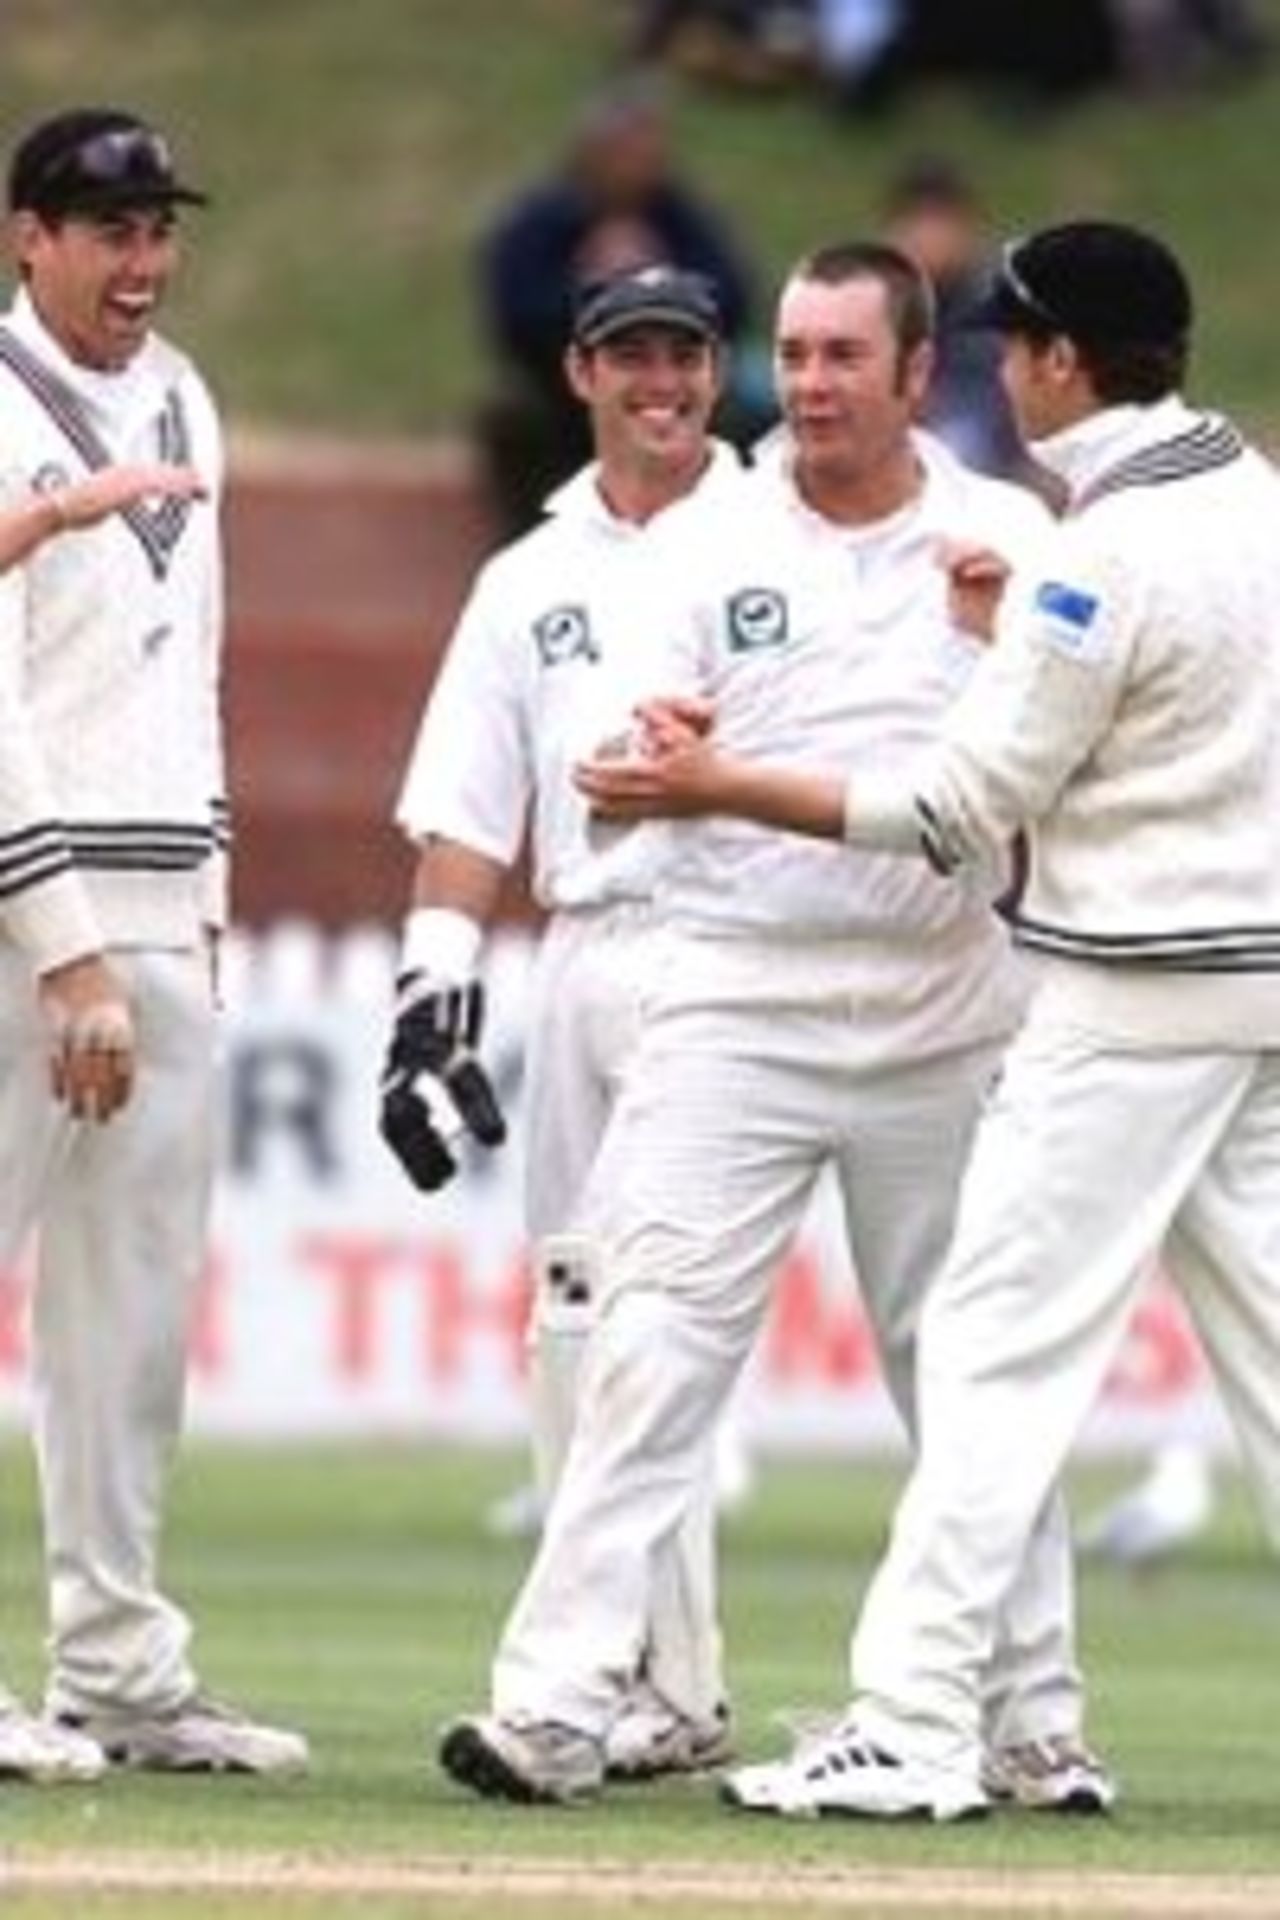 26 Mar 2000: Craig McMillan of New Zealand celebrates with team mates after taking the wicket of Colin Miller of Australia, during day three of the second test between New Zealand and Australia at the Basin Reserve, Wellington, New Zealand.